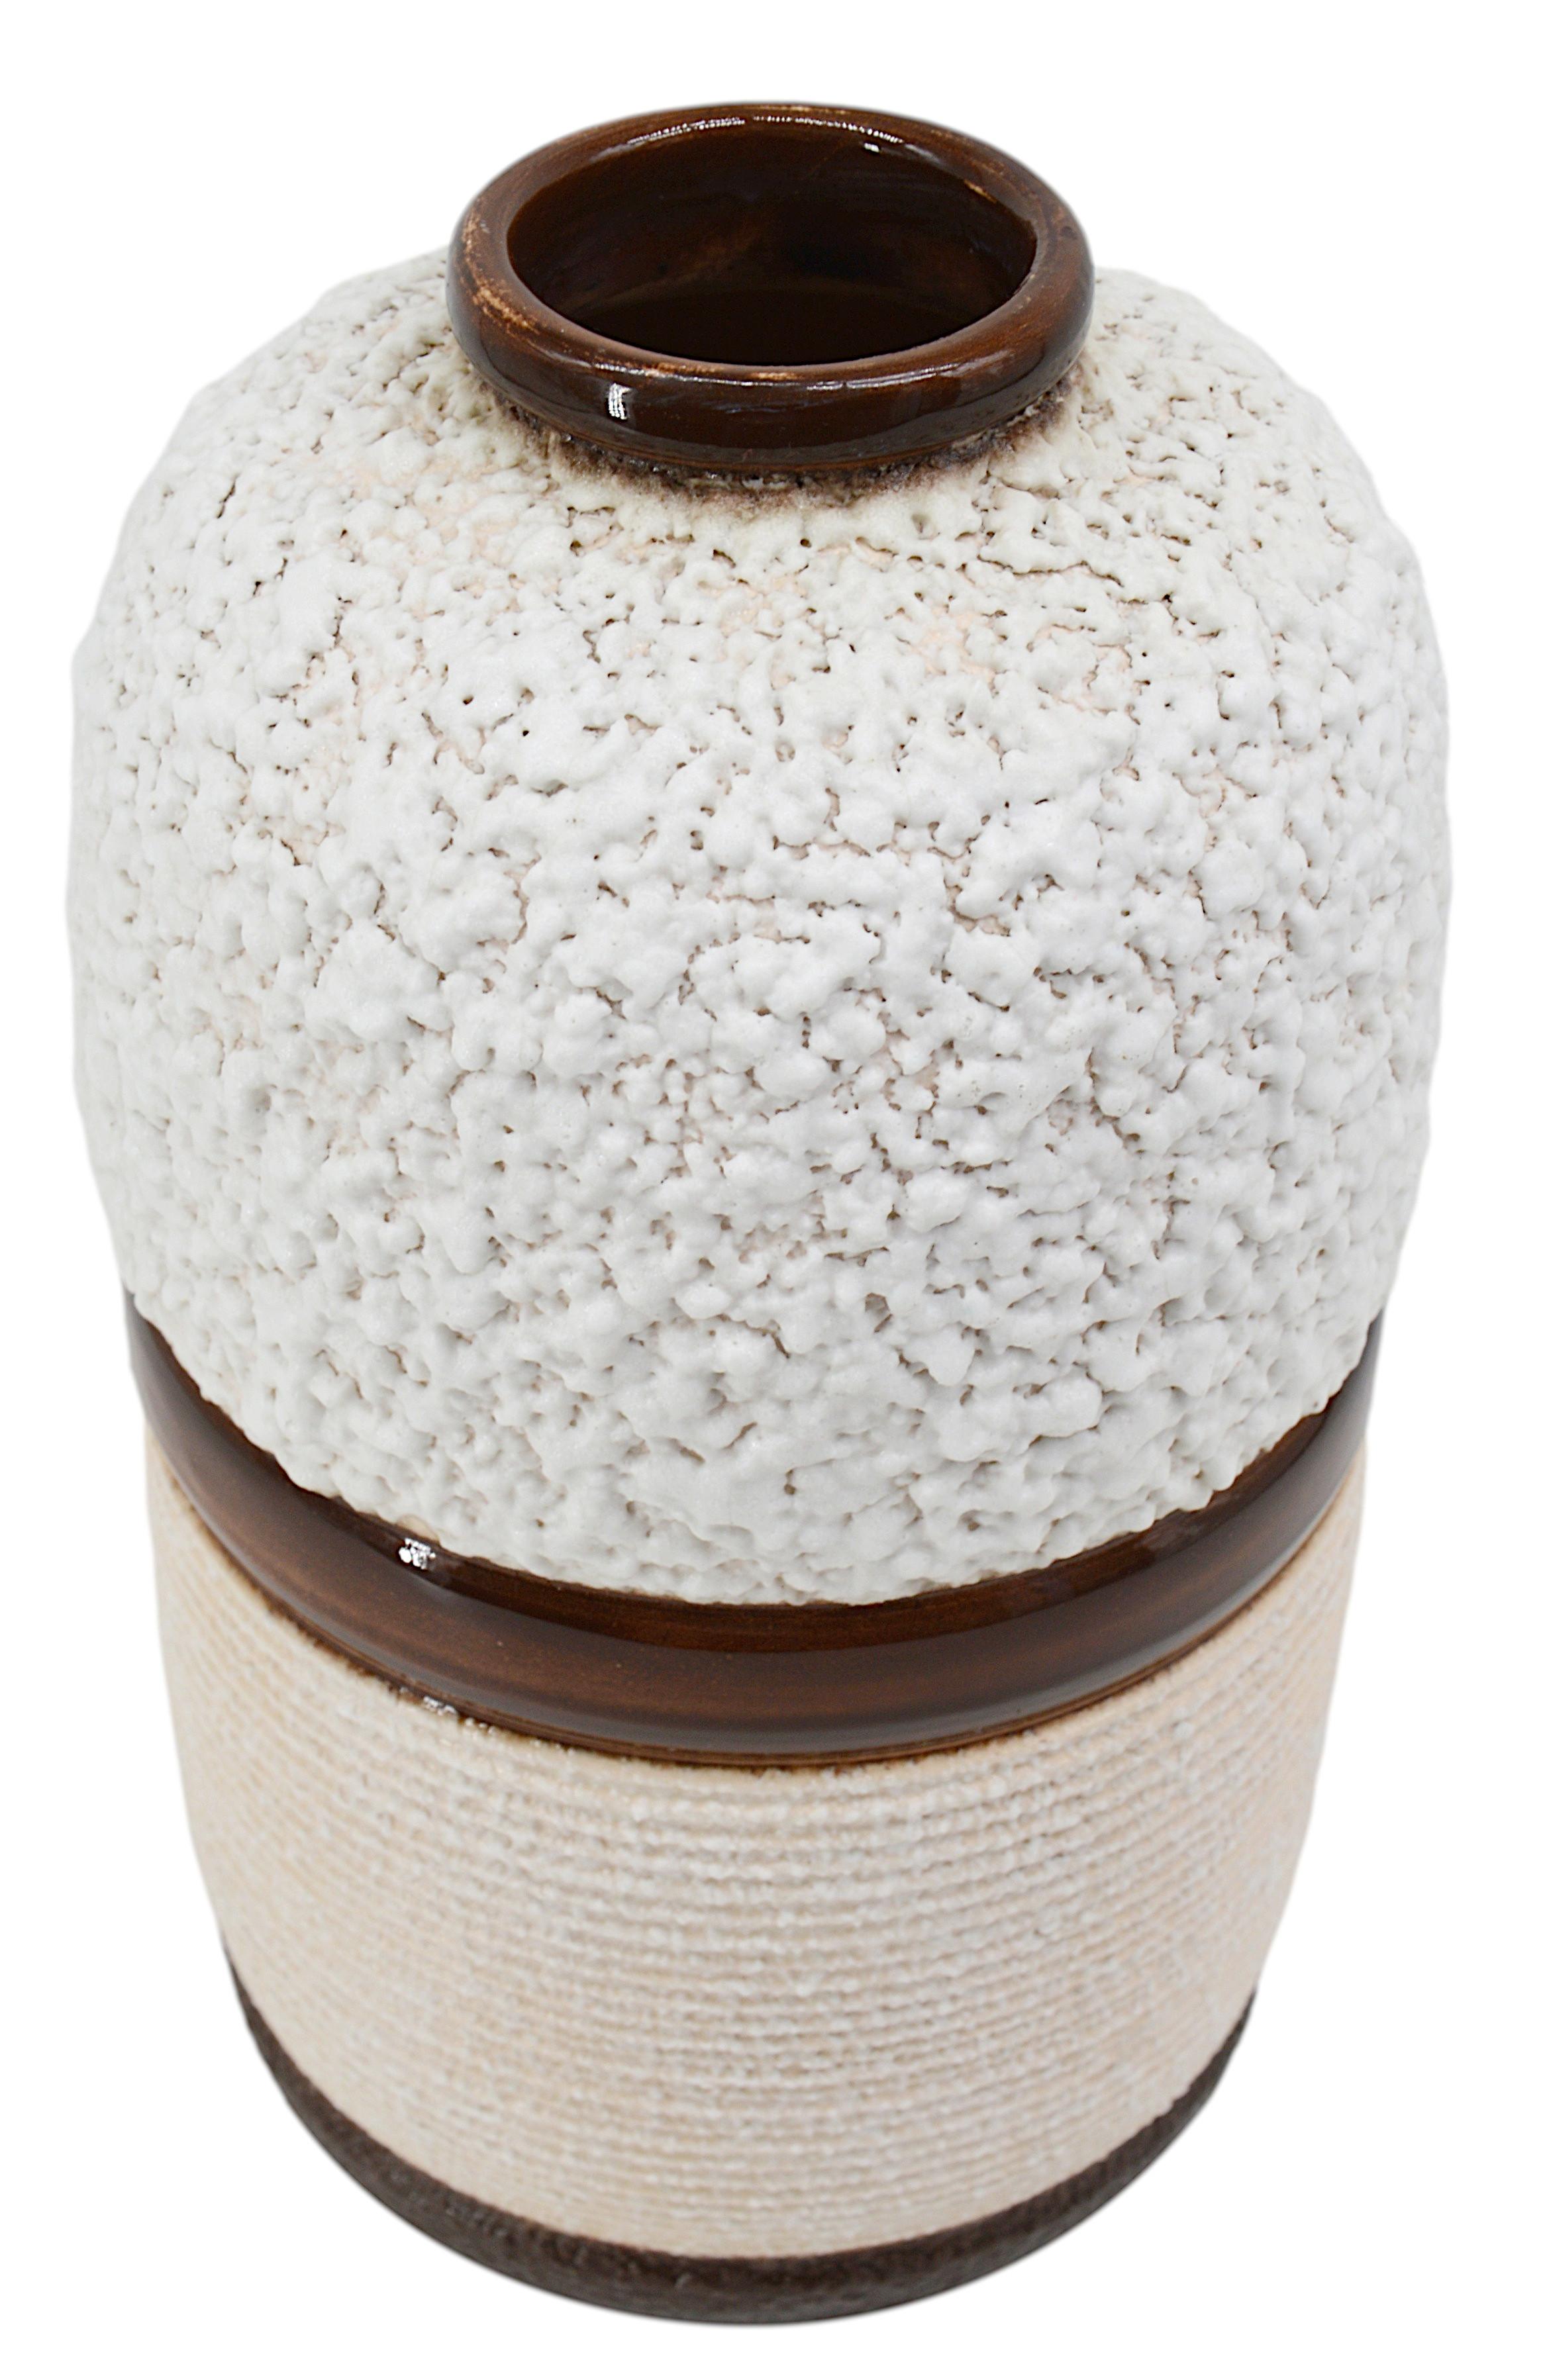 French Art Deco vase by Louis DAGE (Antony, Paris), France, ca.1930. Stoneware. Decoration compartmentalized by glossy brown concentric bands. The upper part consists of lumpy applications of white enamel and the lower part of concentric lines of